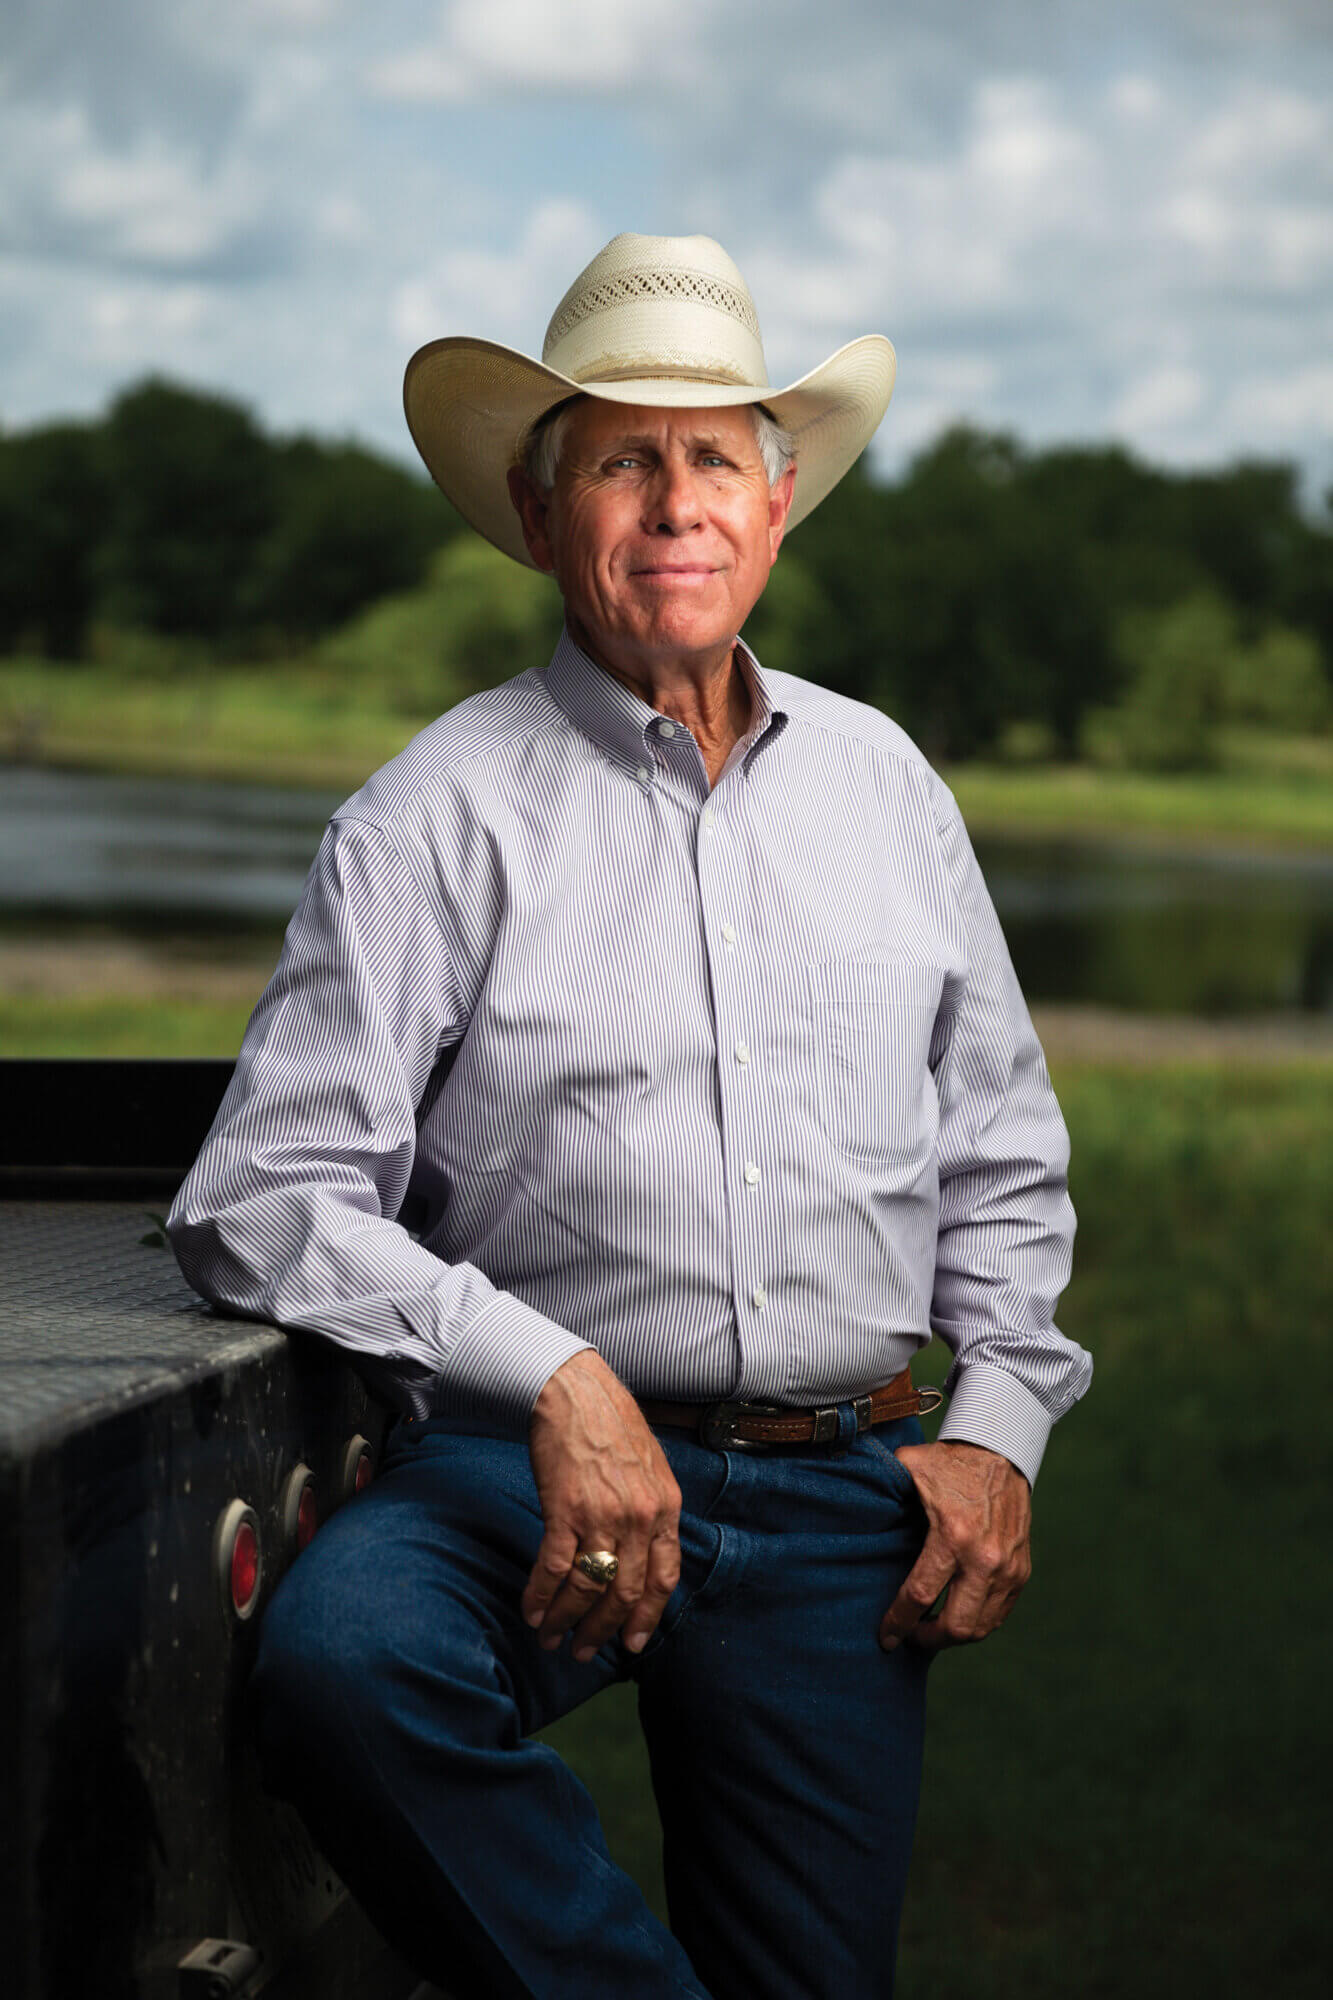 Gary Price regenerates the land while raising beef cattle on 77 Ranch in Blooming Grove, Texas.